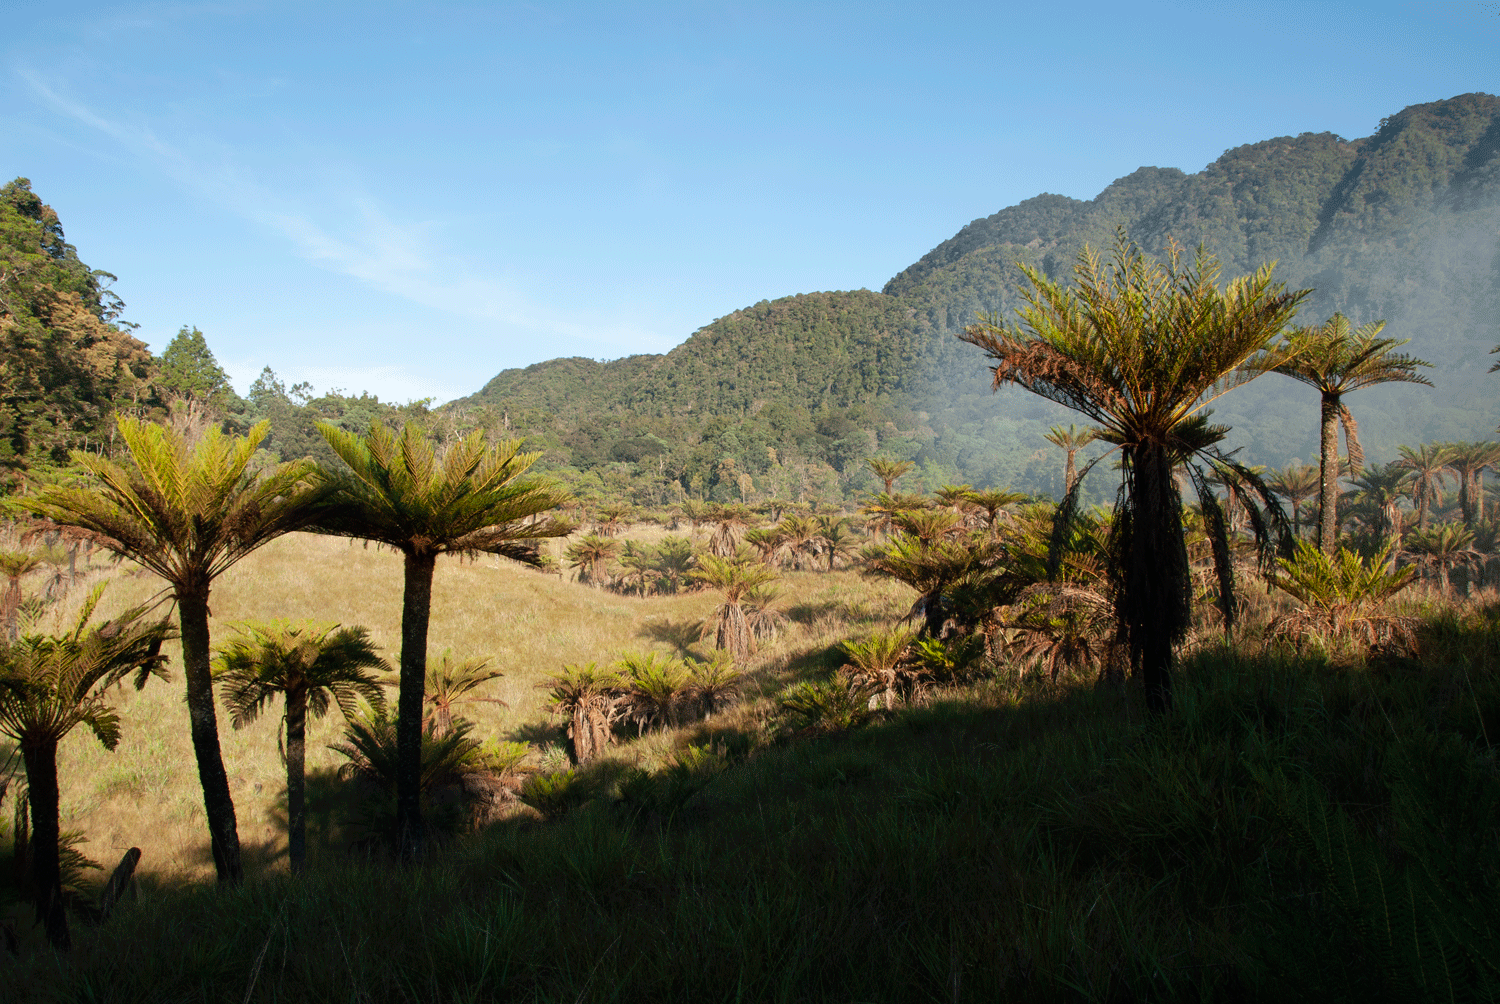 Landscape of New Guinea with Cyathea tree ferns in the foreground